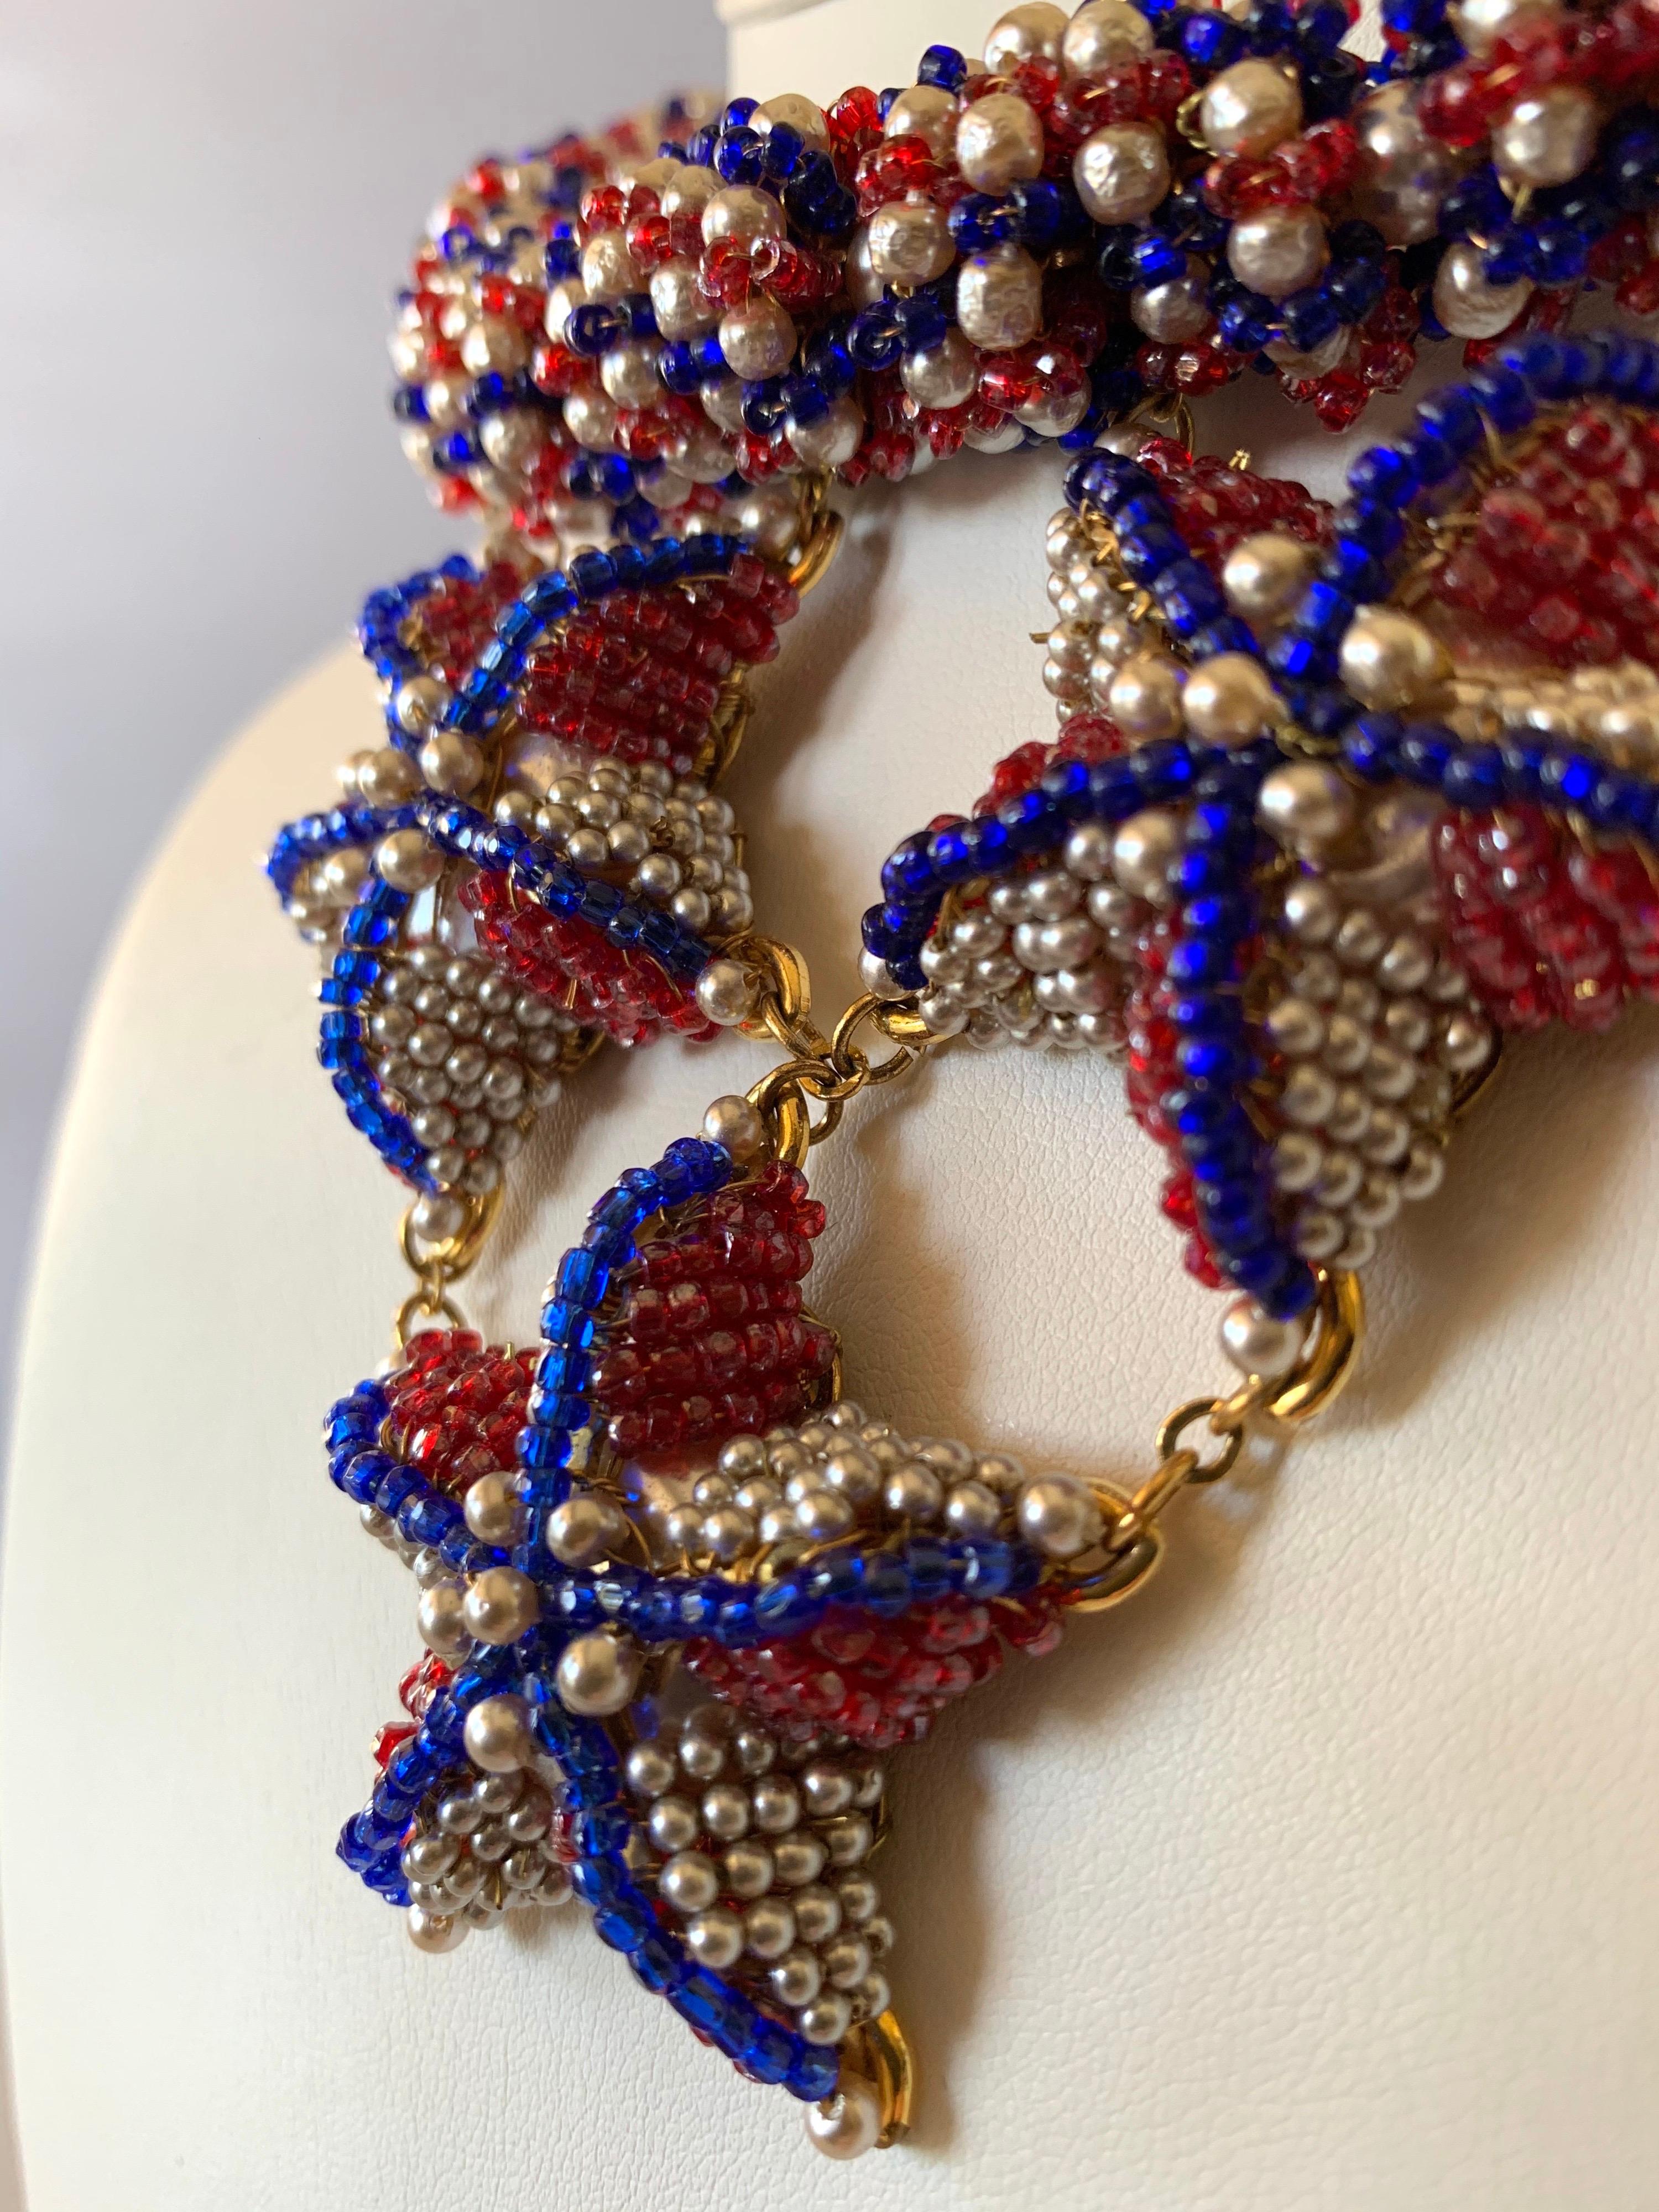 Monumental haute couture beaded bib statement necklace, by William de Lillo for Coco Chanel haute couture. Comprised out of gilt metal dore (14k plate) the necklace features a thick beaded chain in red, white, and blue which is accented by creamy